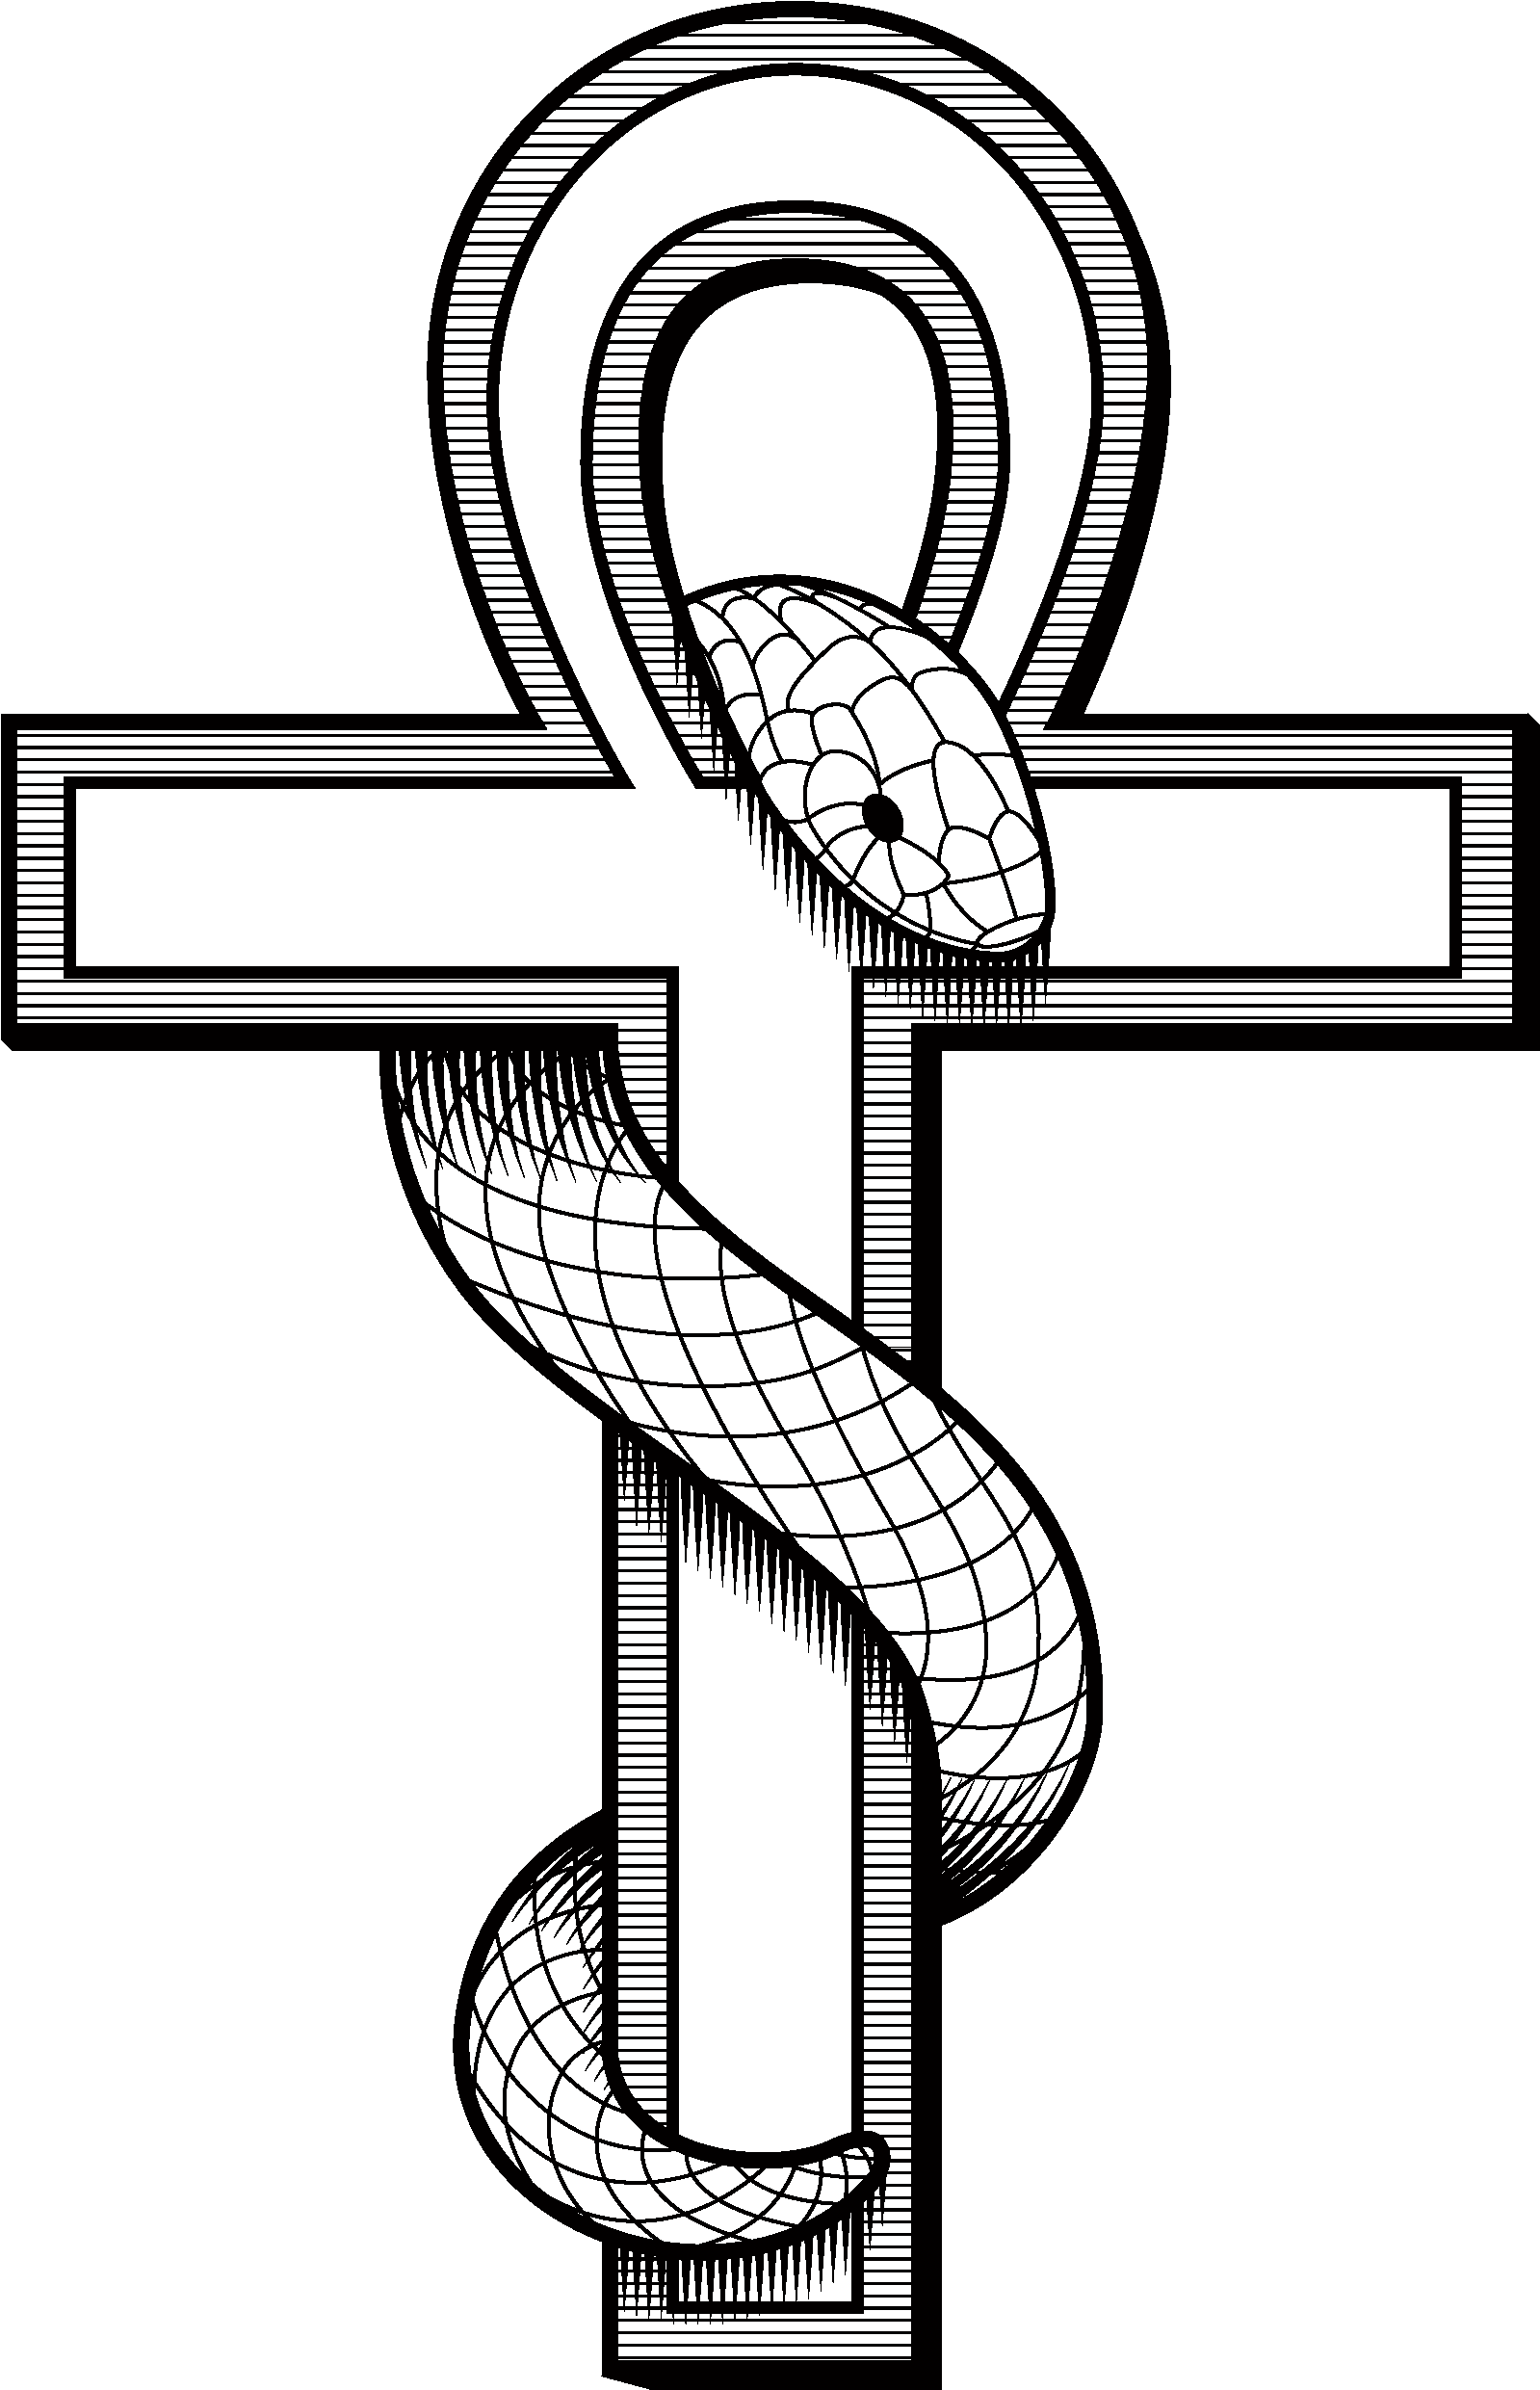 Contact Details - Ankh Snake (1834x2717)